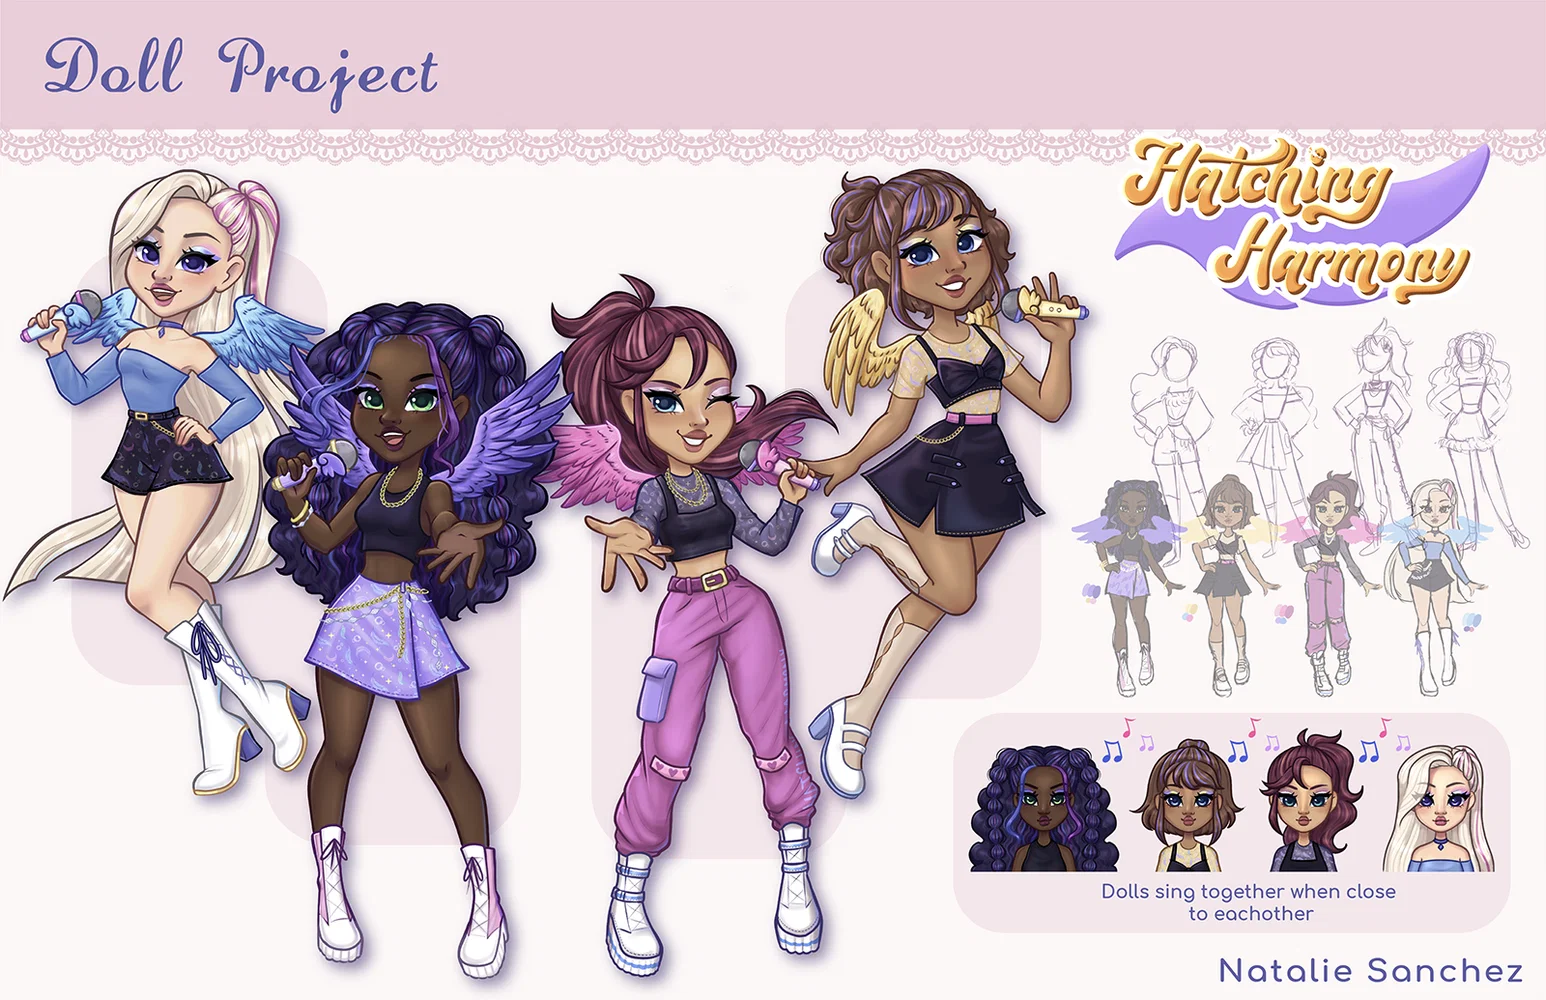 Portfolio page of original doll line- Hatching Harmony. Includes beauty shot of four dolls part of an idol group with colorful wings. Feature callout and initial sketches